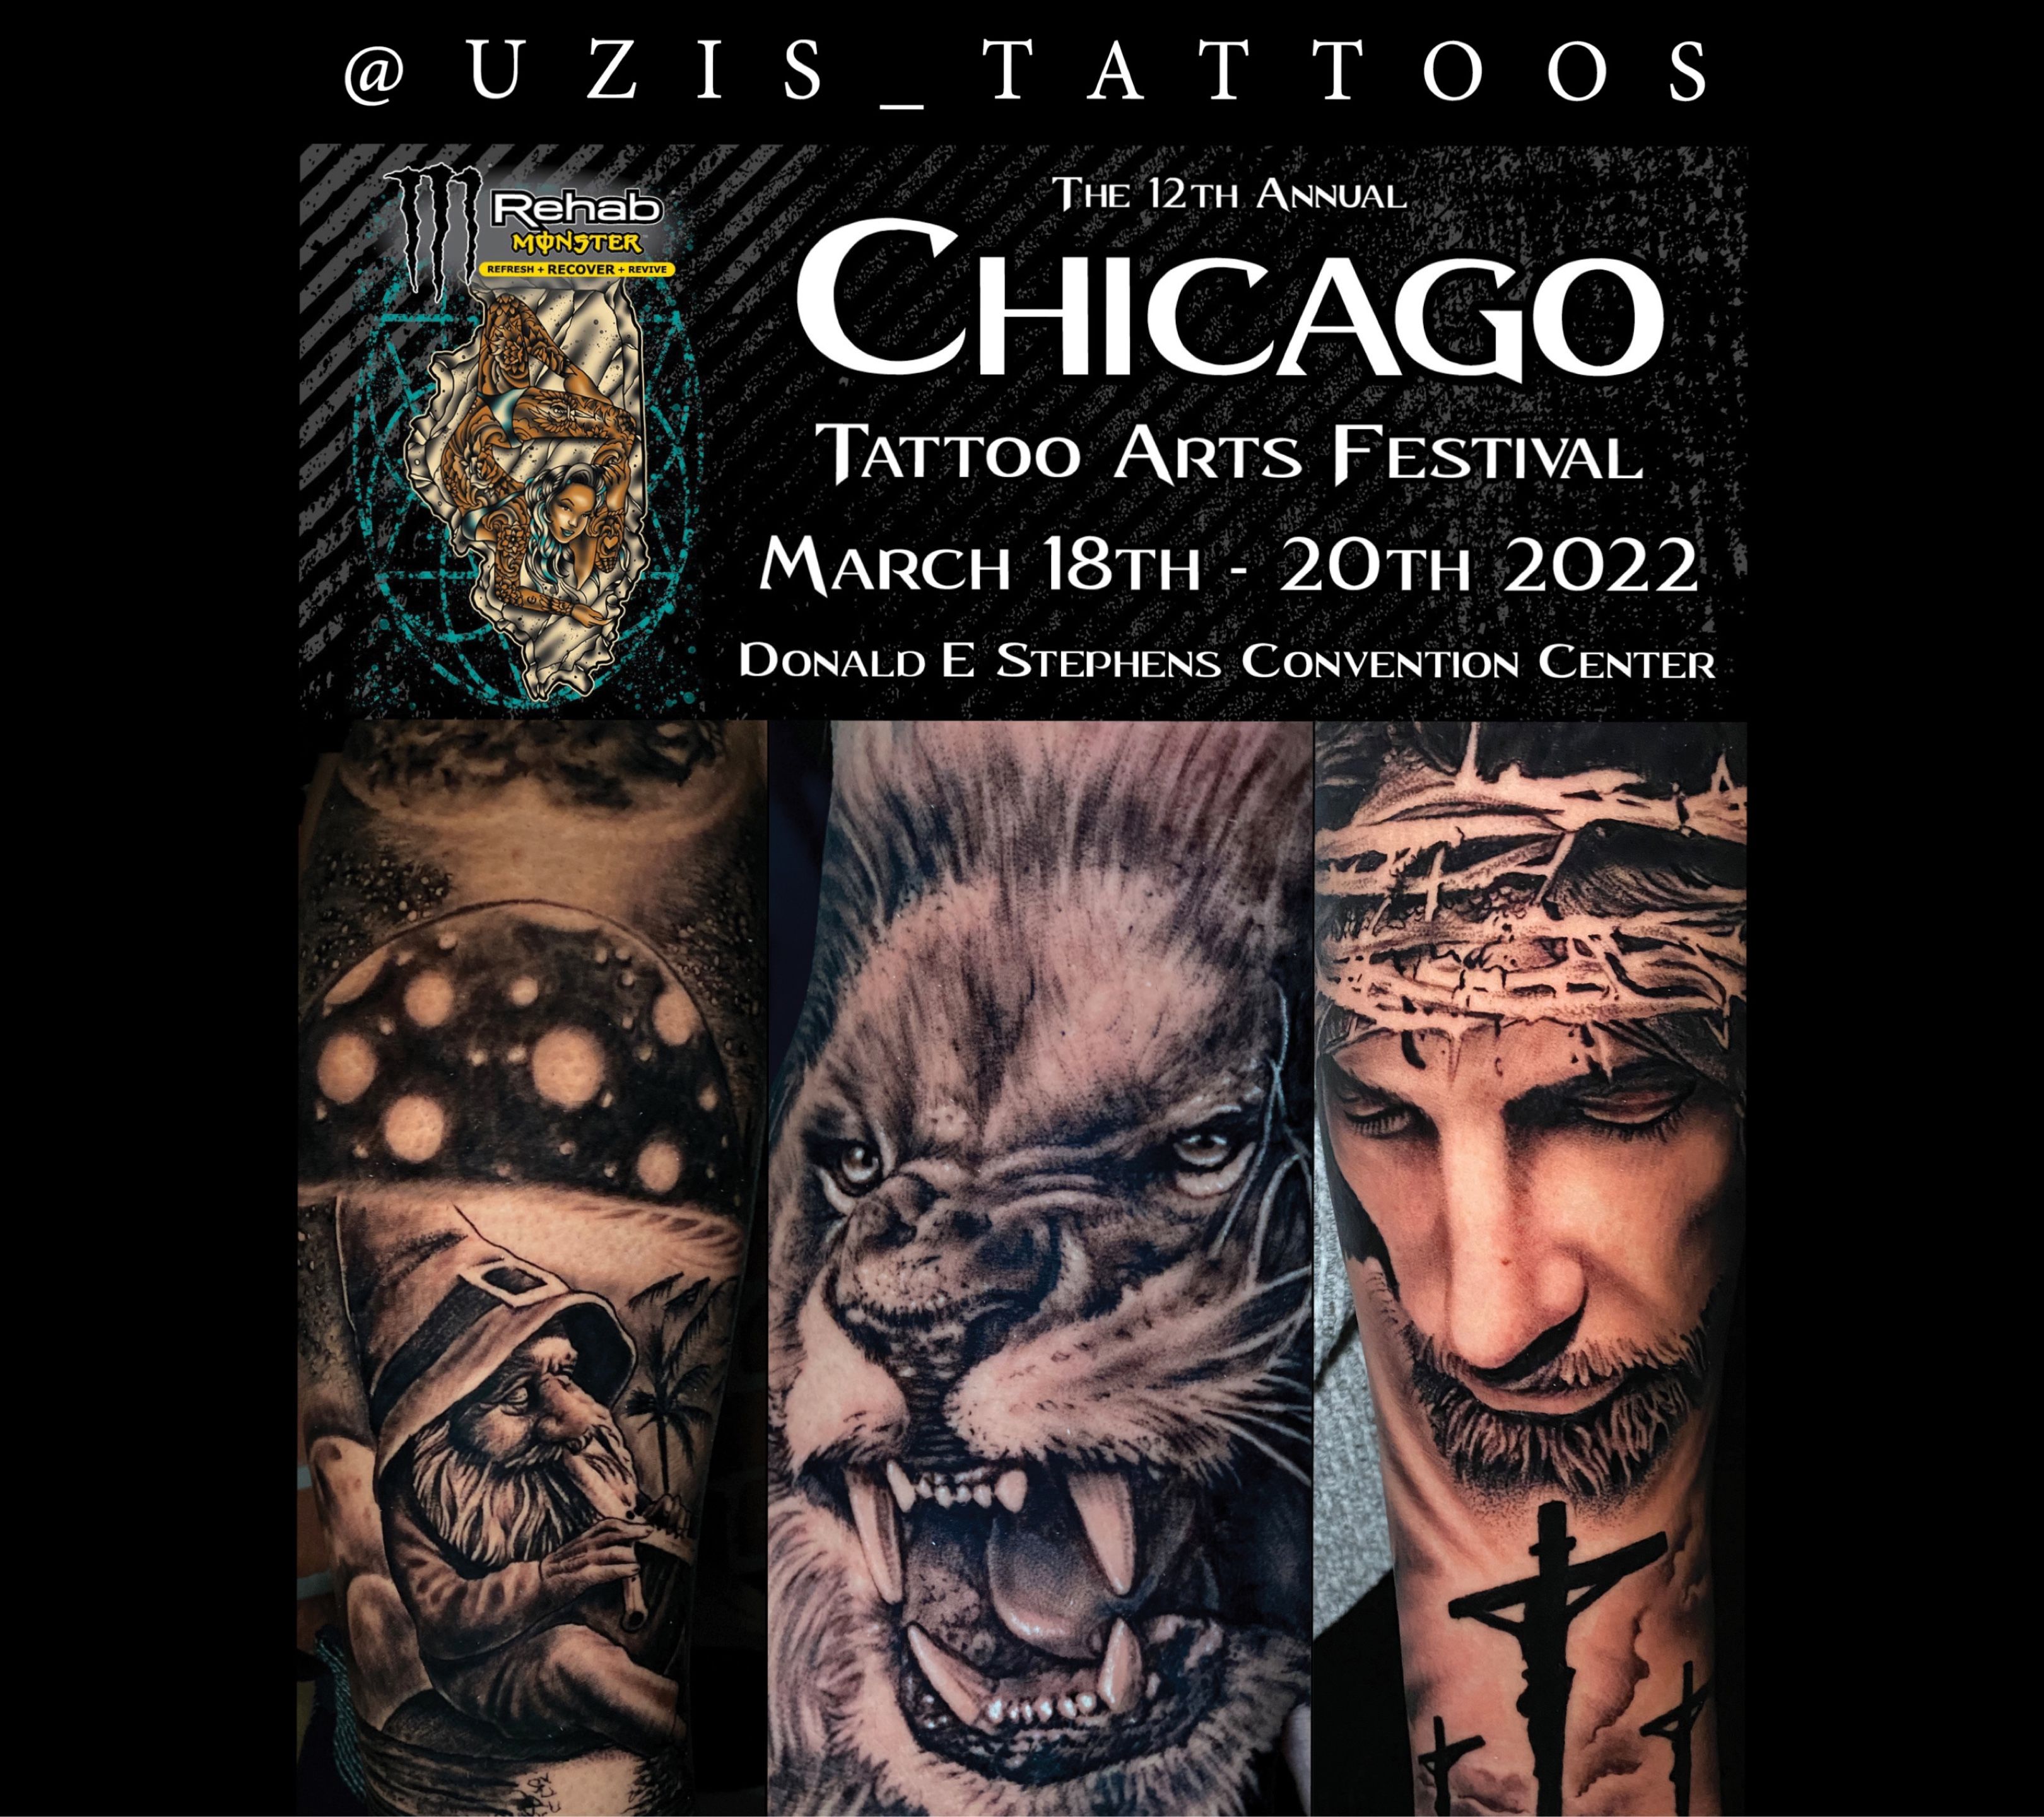 MUTED CHICAGO TATTOO CONVENTION  Live Tattooing Fire Breathing  Contests  Villain Arts  YouTube